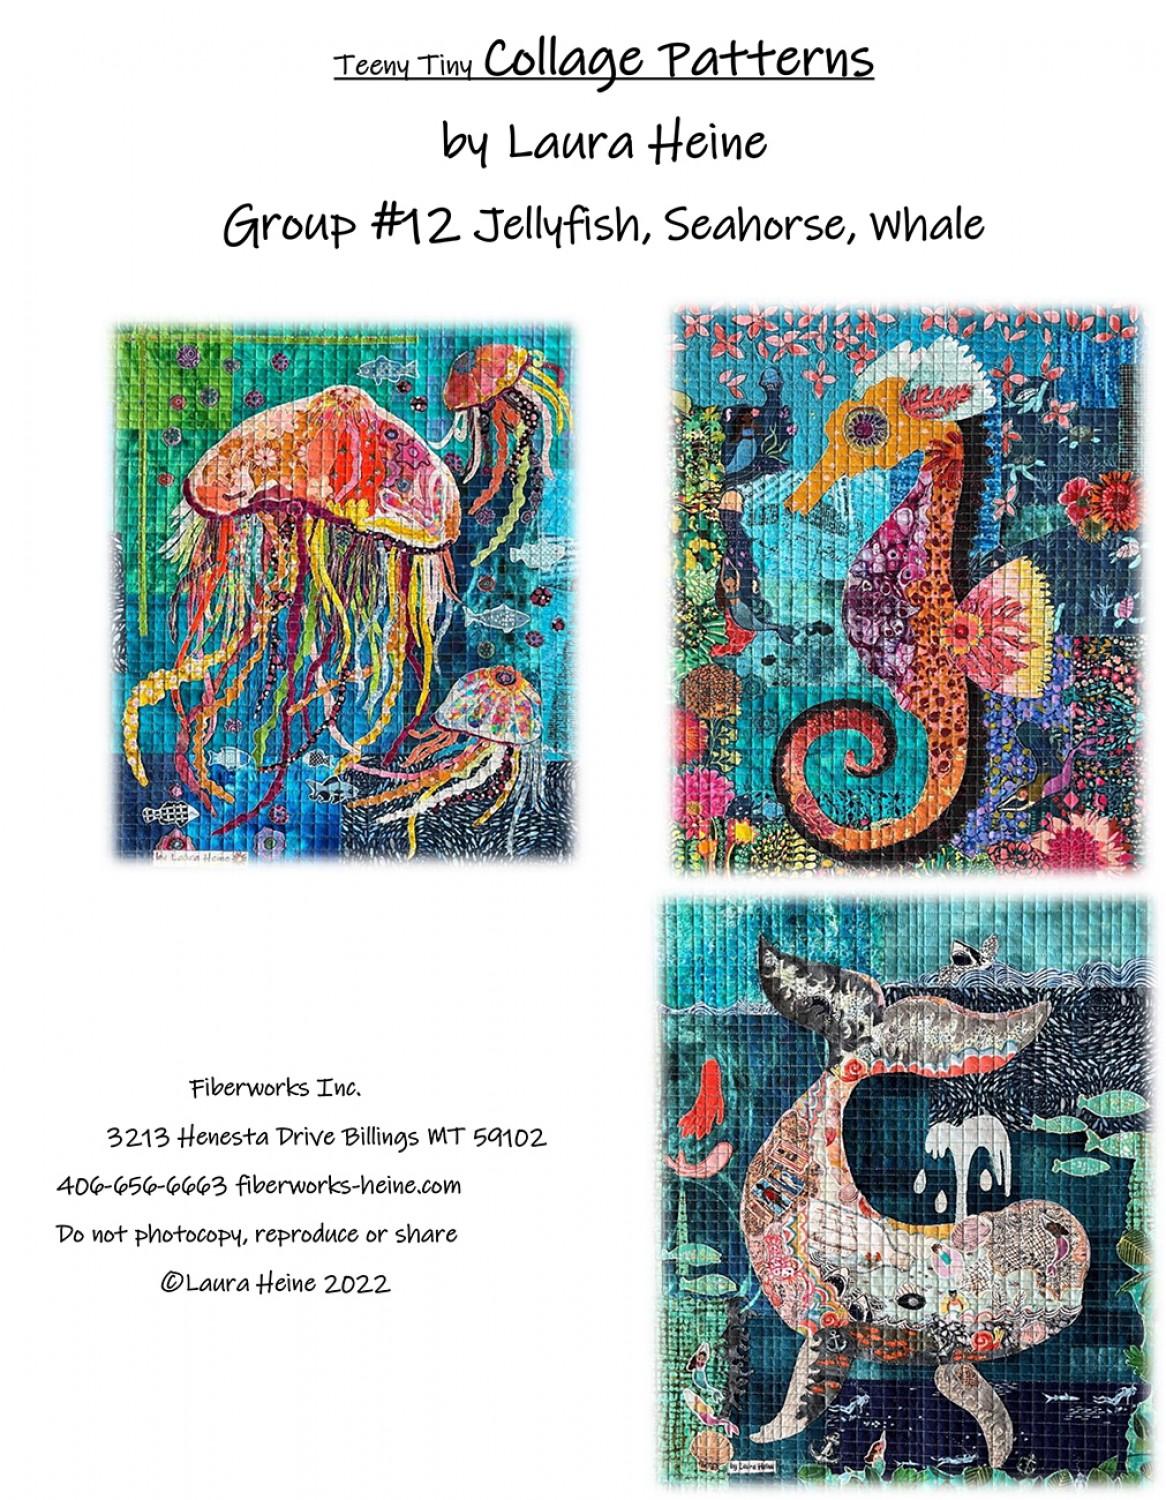 Laura HeineTeeny Tiny Collage Patterns - Group#12 Jellyfish, Seahorse, Whale